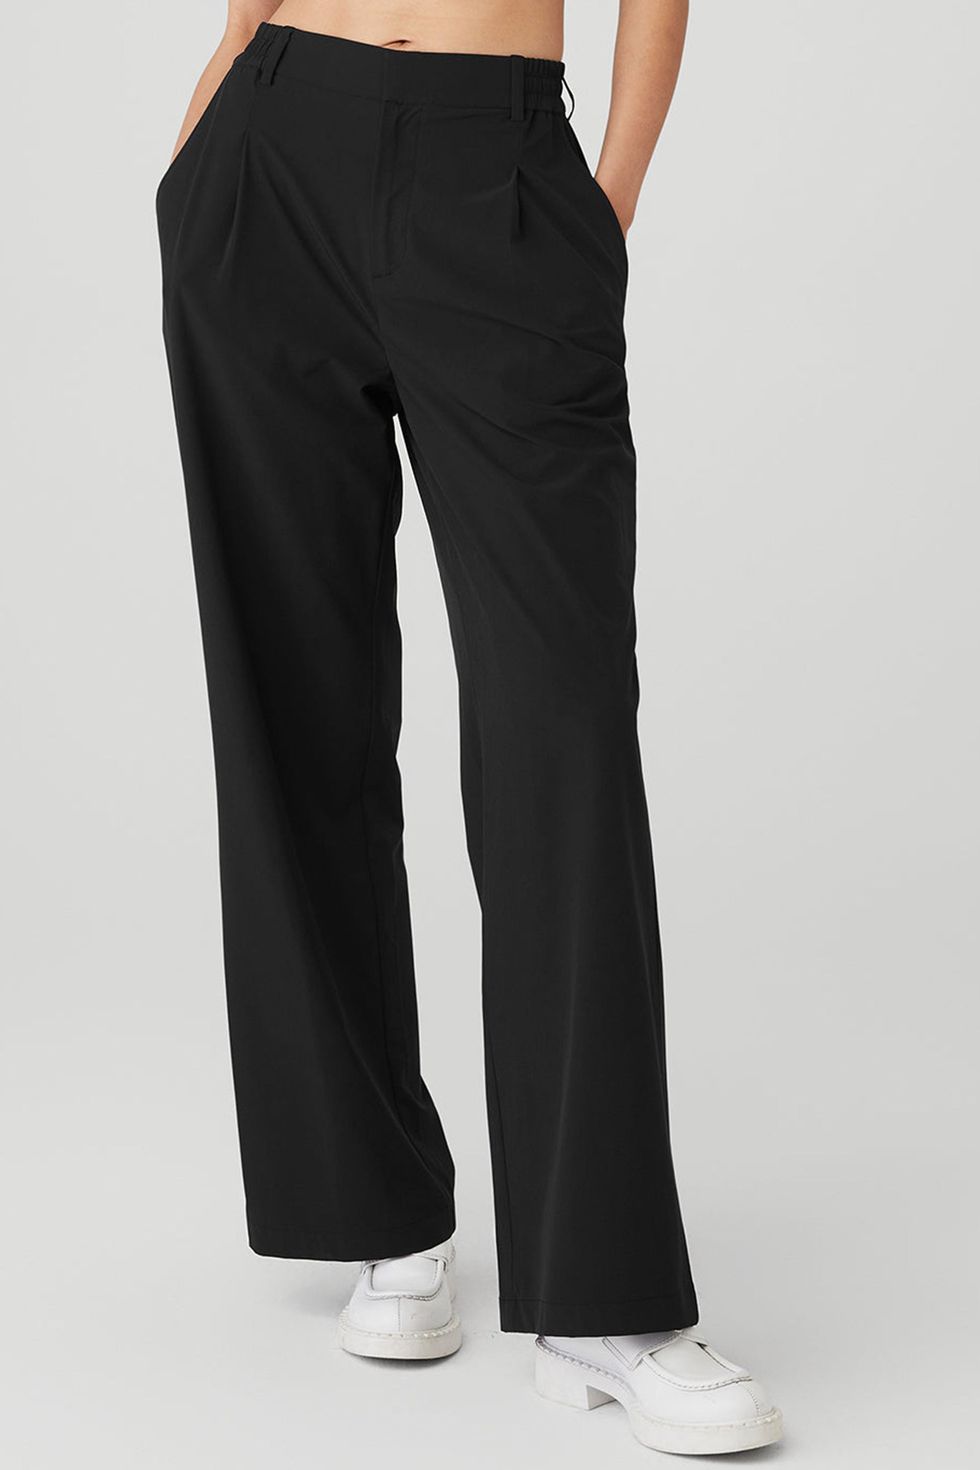 Buy Black Trousers & Pants for Women by Summer Somewhere Online